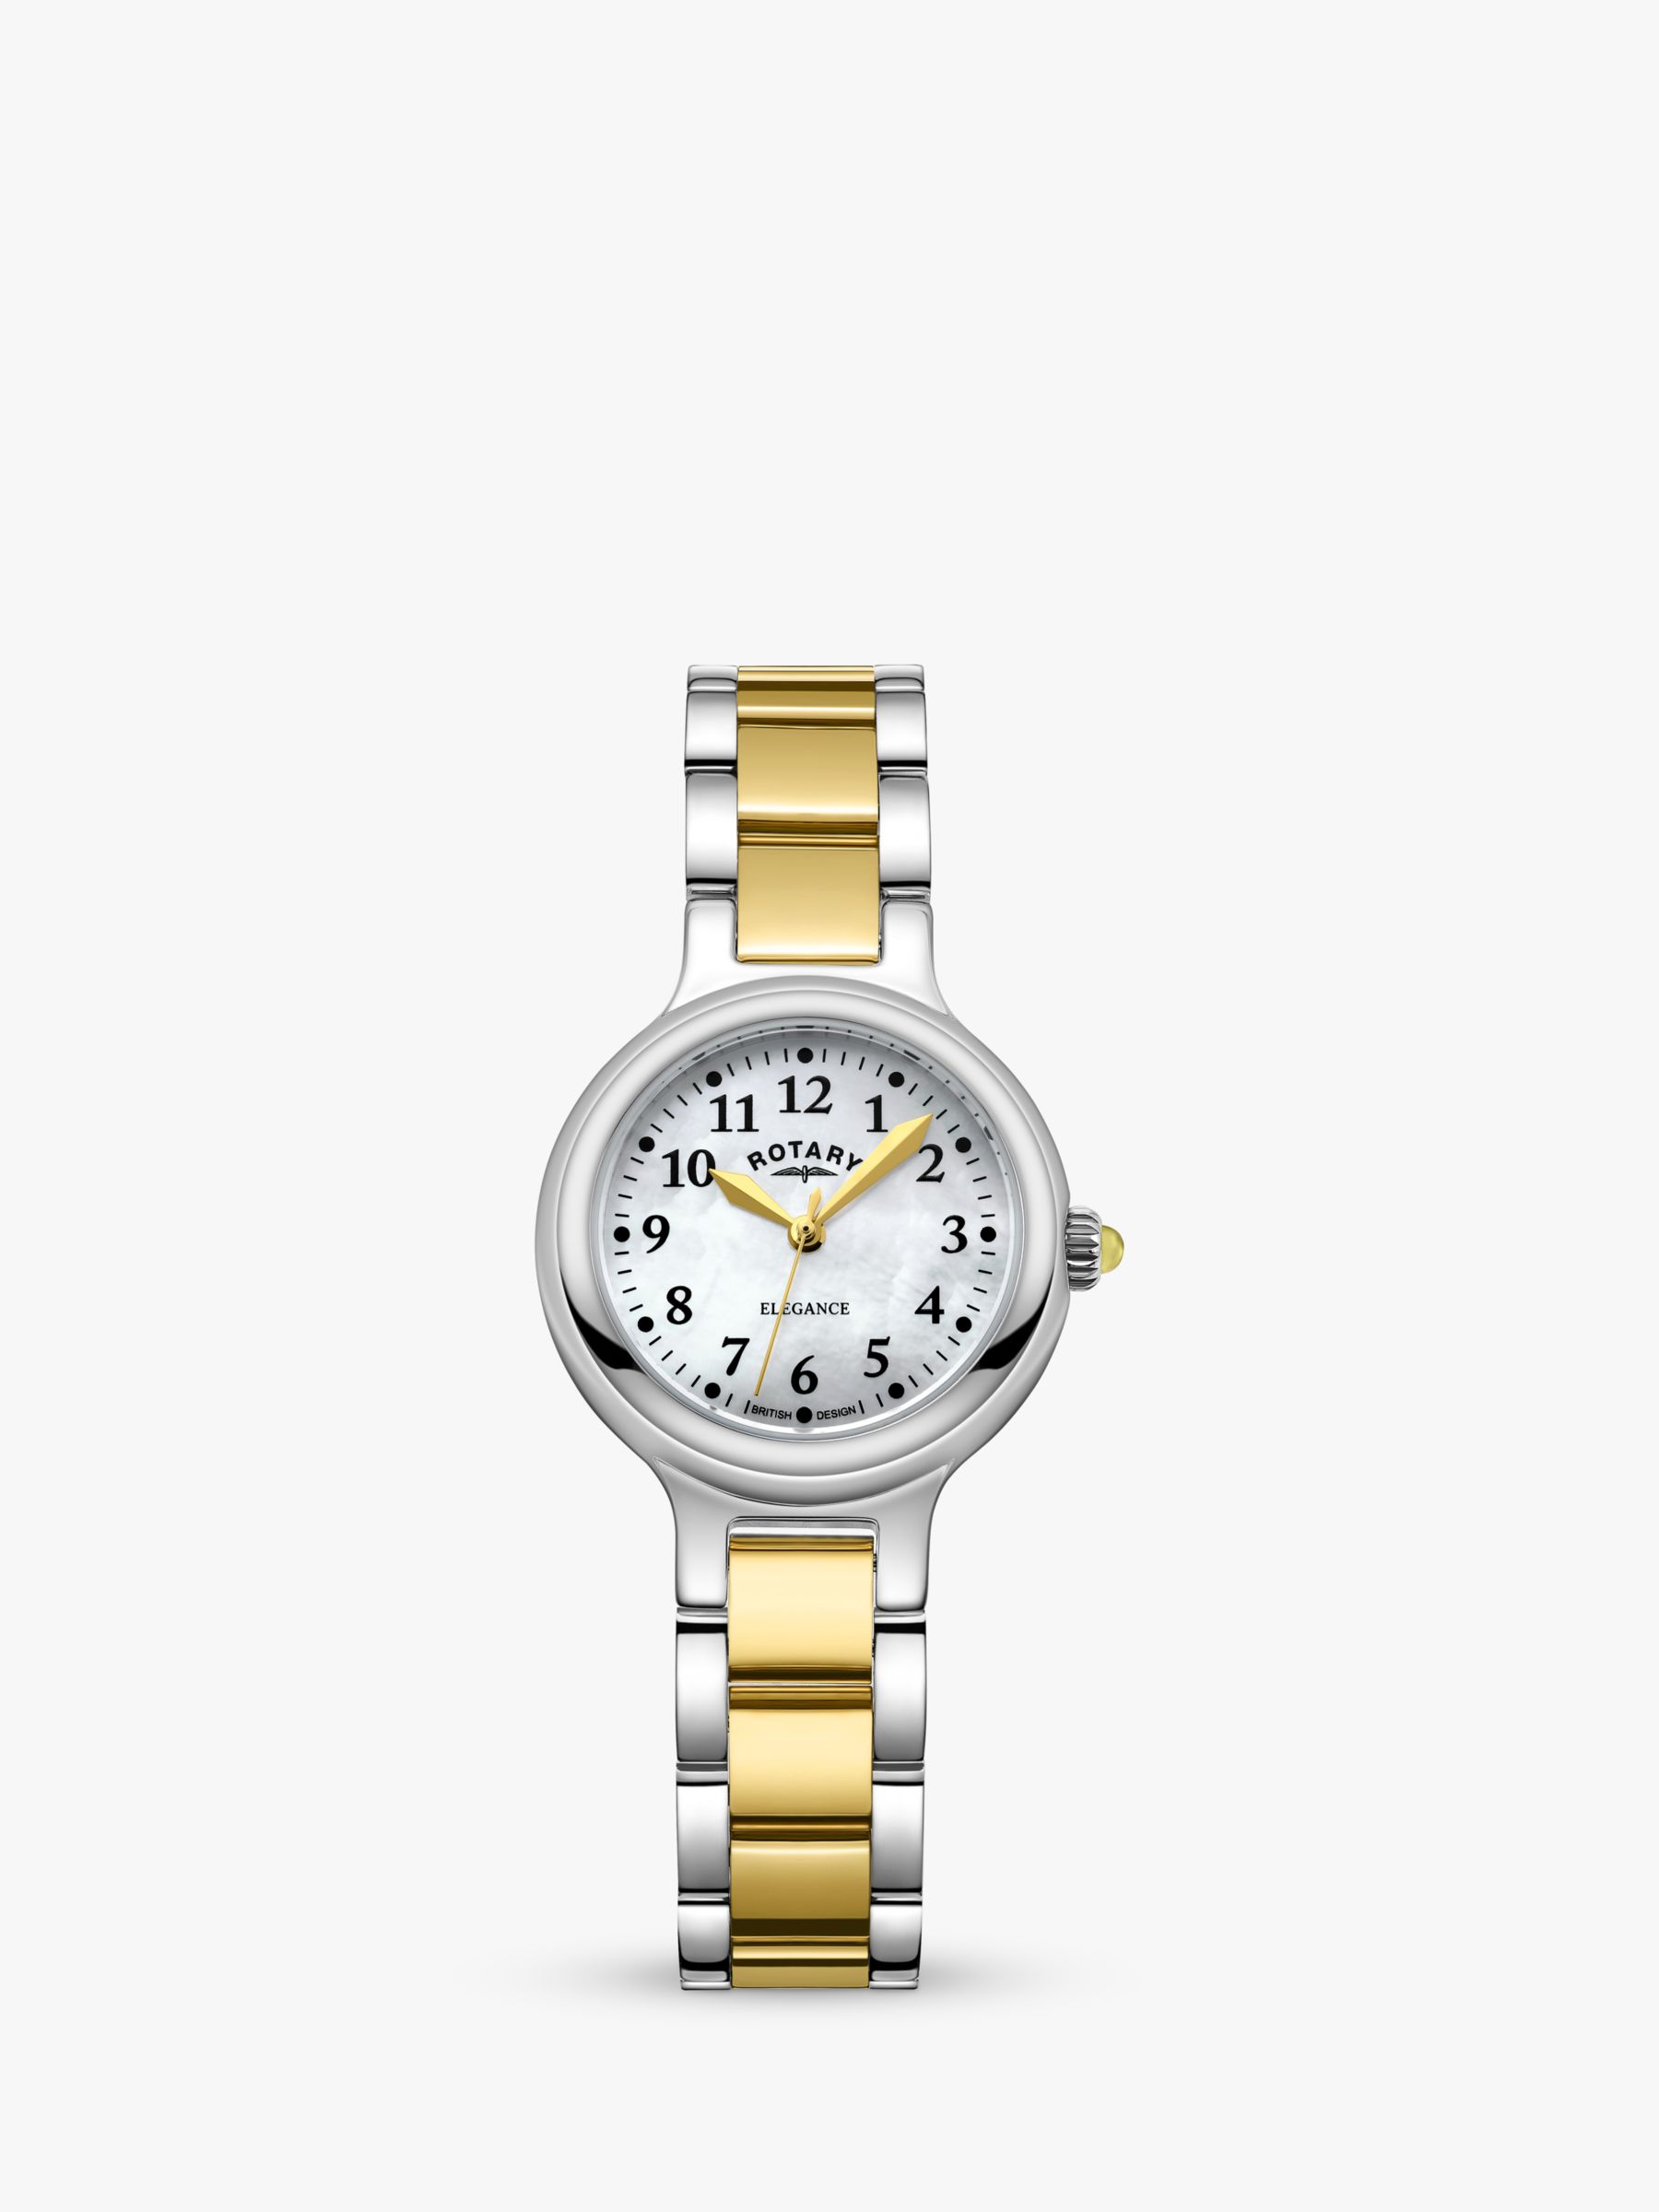 The Robinson Stainless Steel Women's Watch